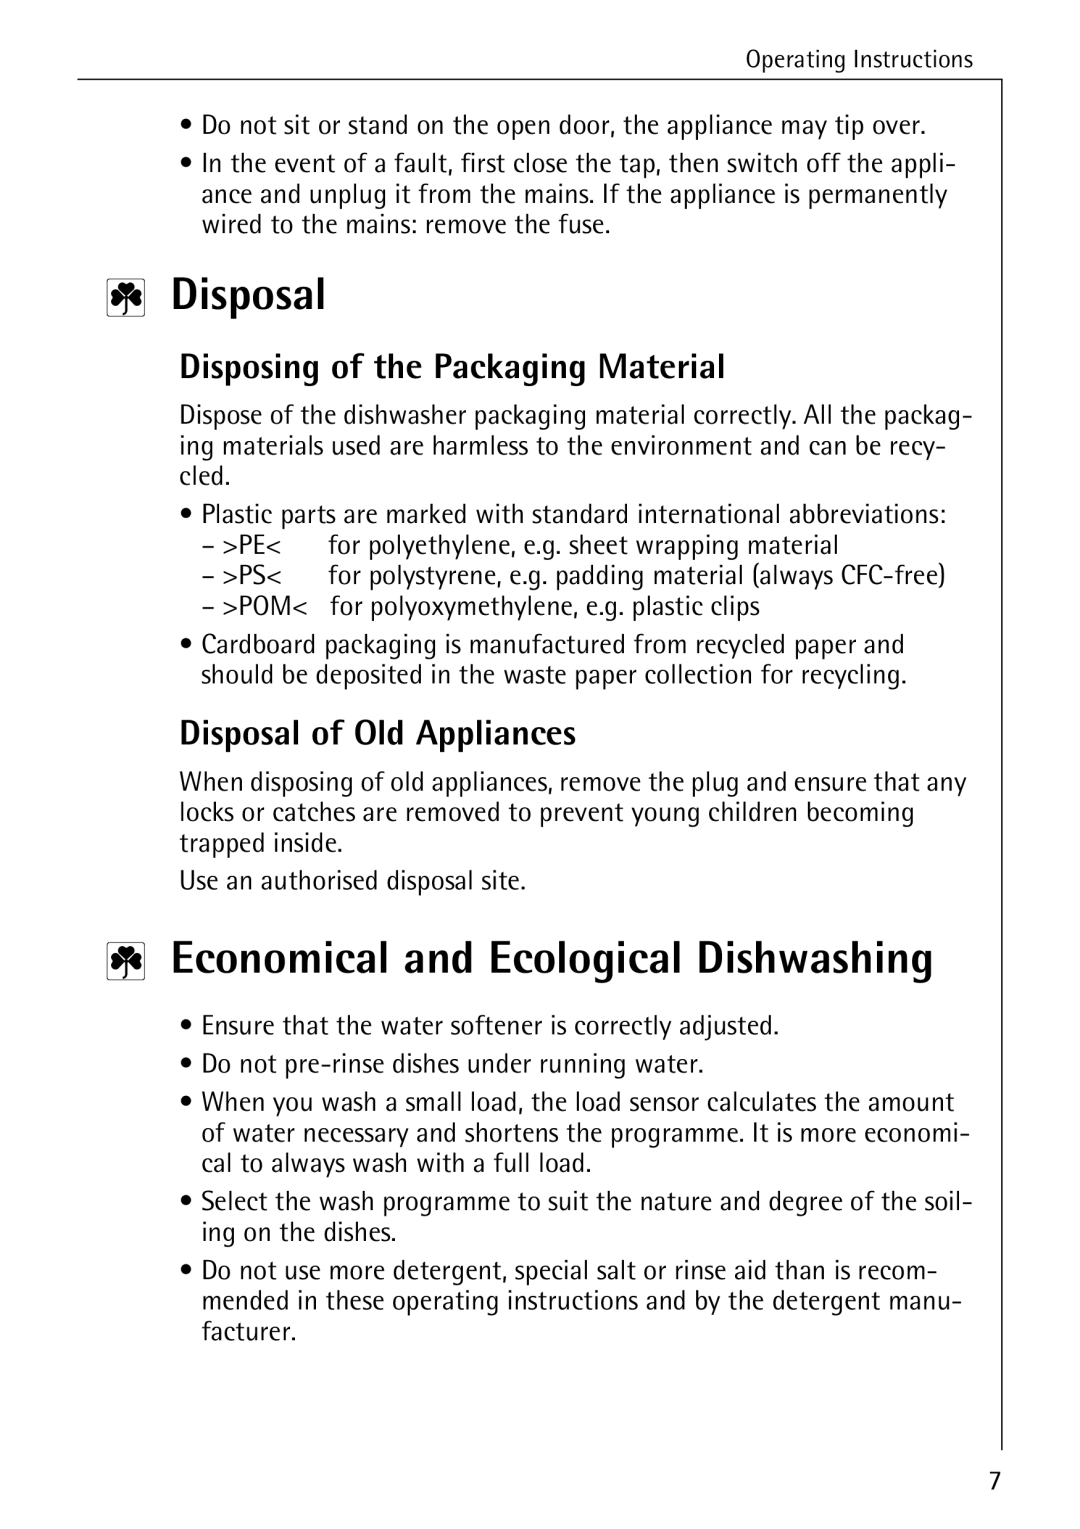 Electrolux FAVORIT 60870 manual Disposal, Economical and Ecological Dishwashing, Disposing of the Packaging Material 